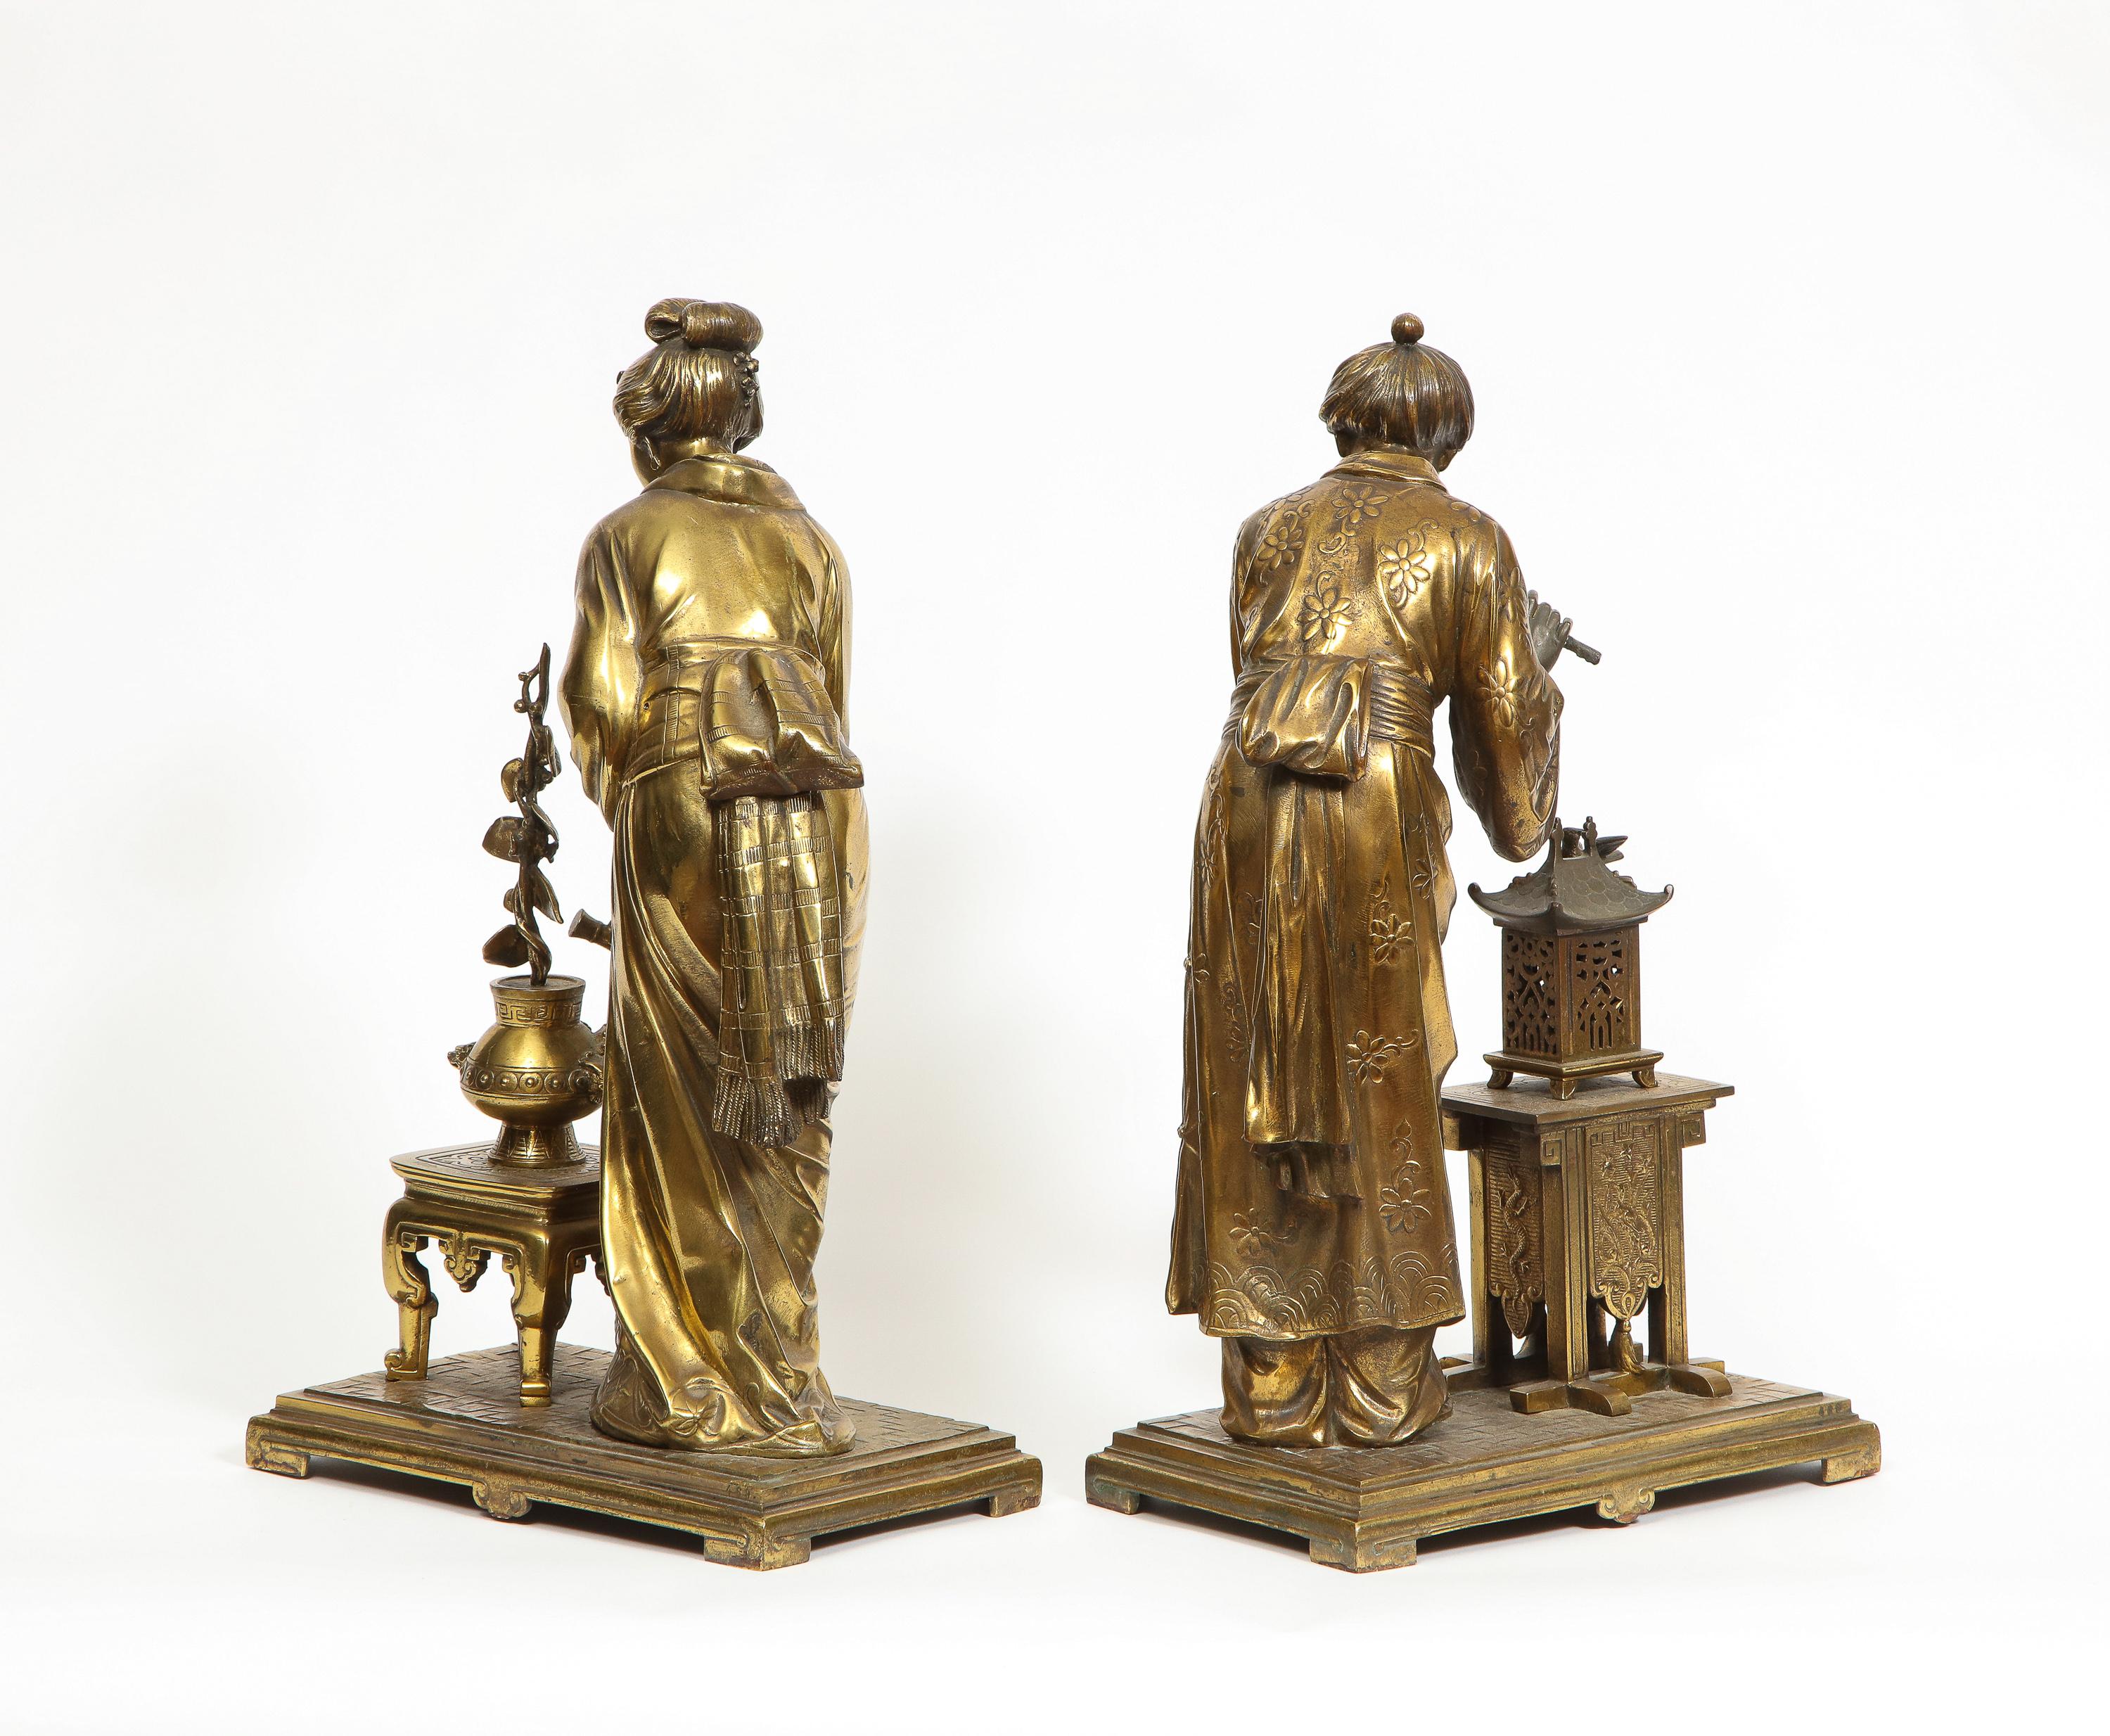 A Rare Pair of French Japonisme Bronze Sculptures by Eugene Laurent, circa 1870 9